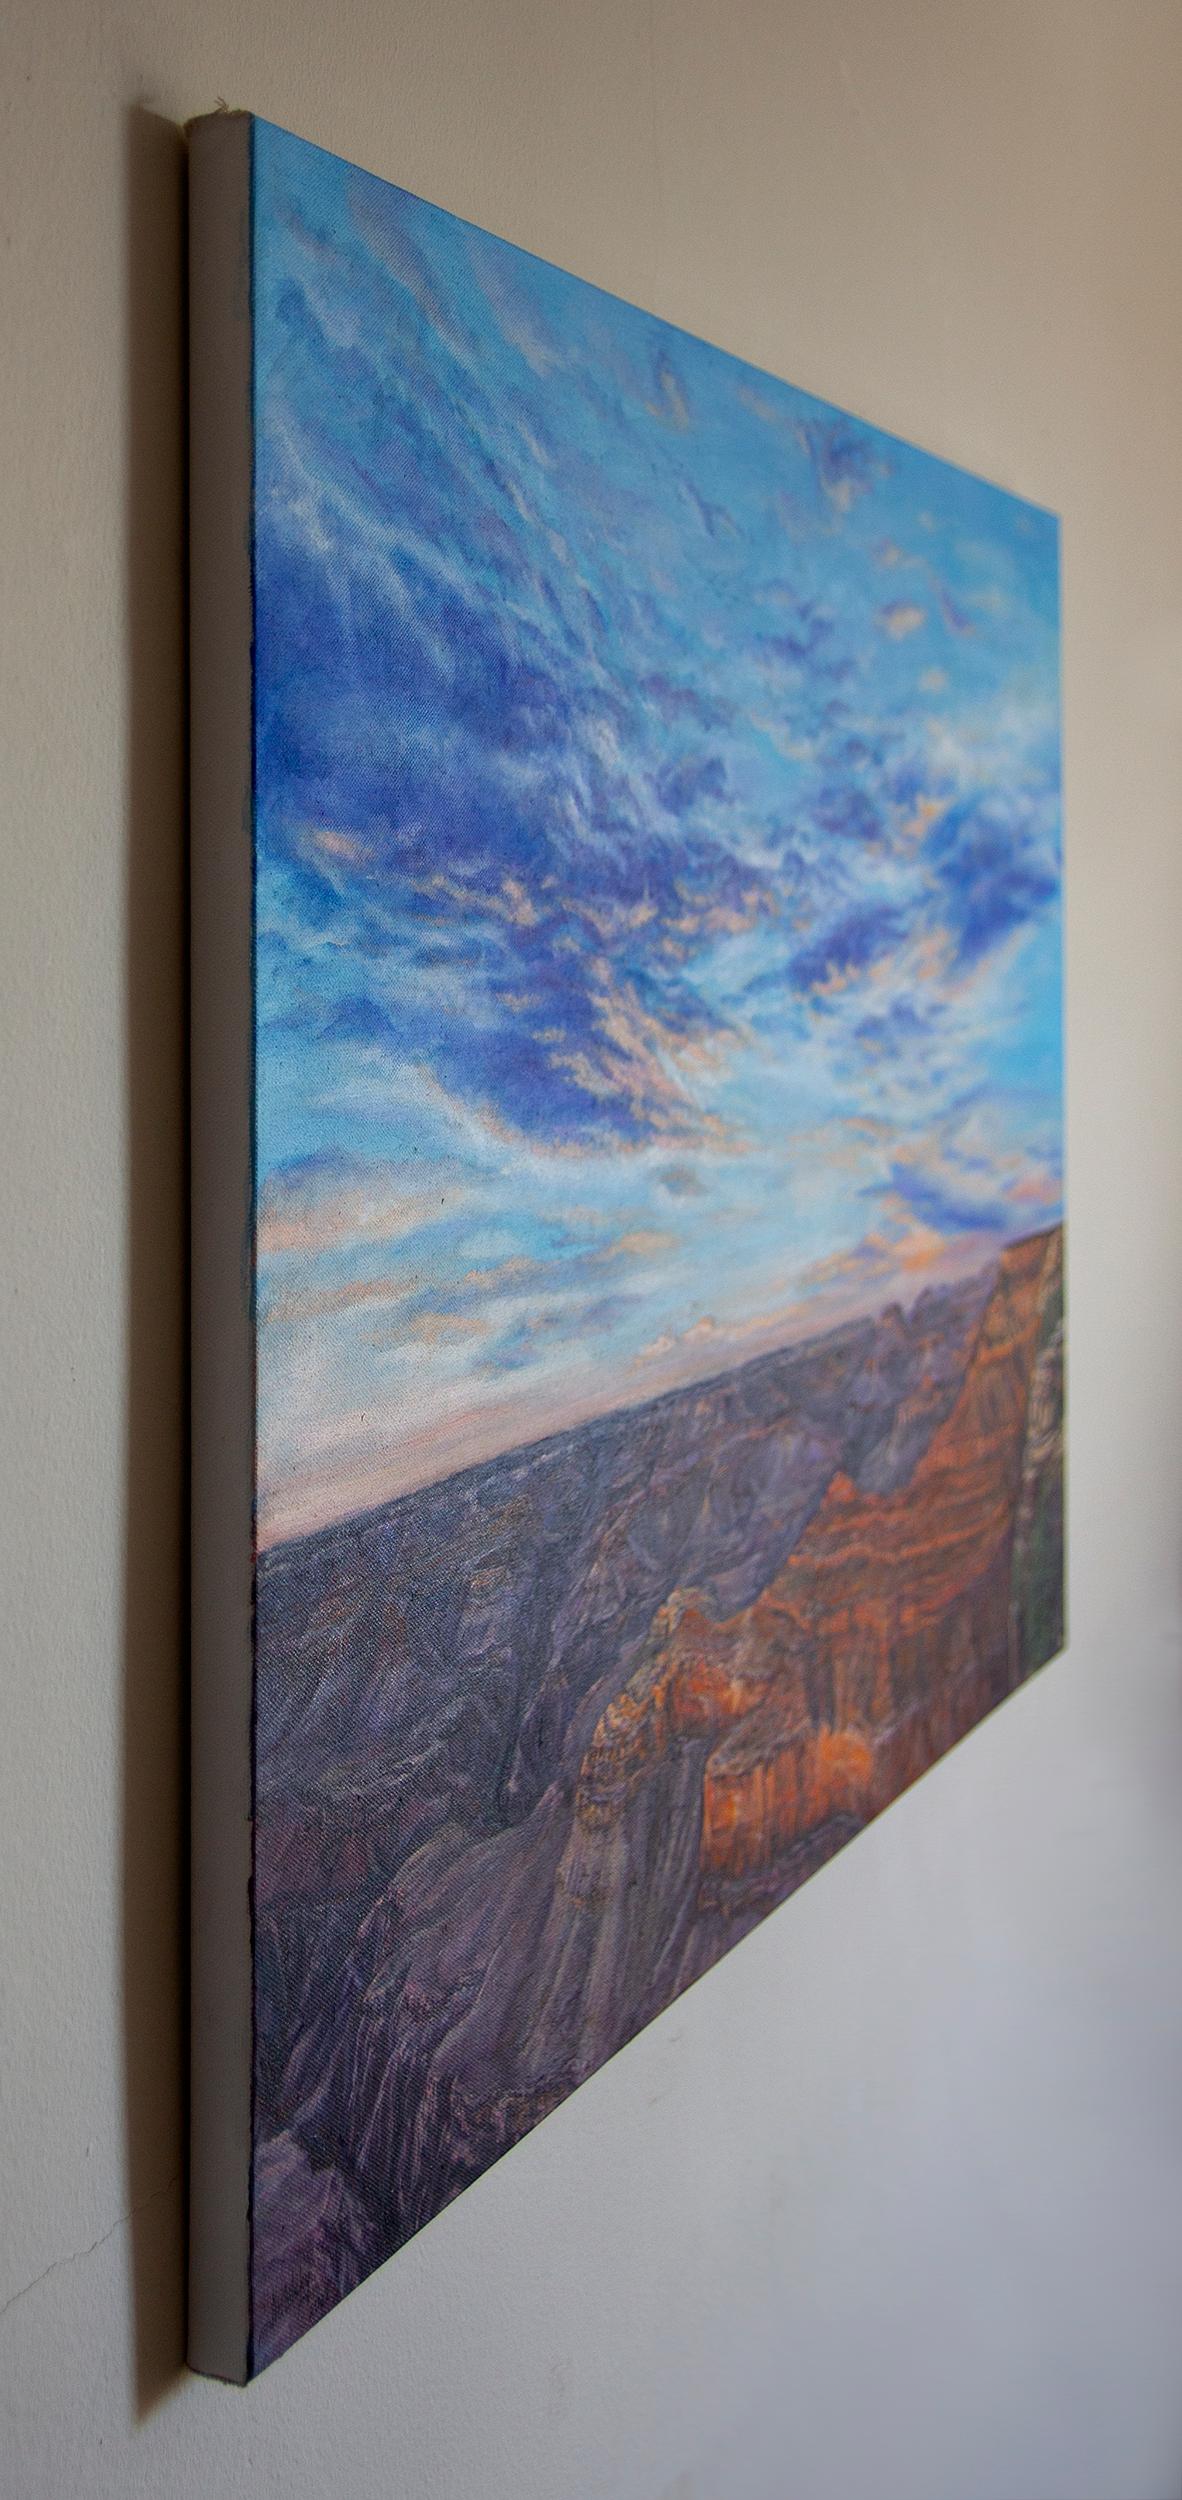 <p>Artist Comments<br>At the break of dawn, the Grand Canyon embraces yet another fleeting moment in its timeless existence. Its layers echo the majestic grandeur of this natural wonder. Artist Olena Nabilsky beautifully expresses the profound awe